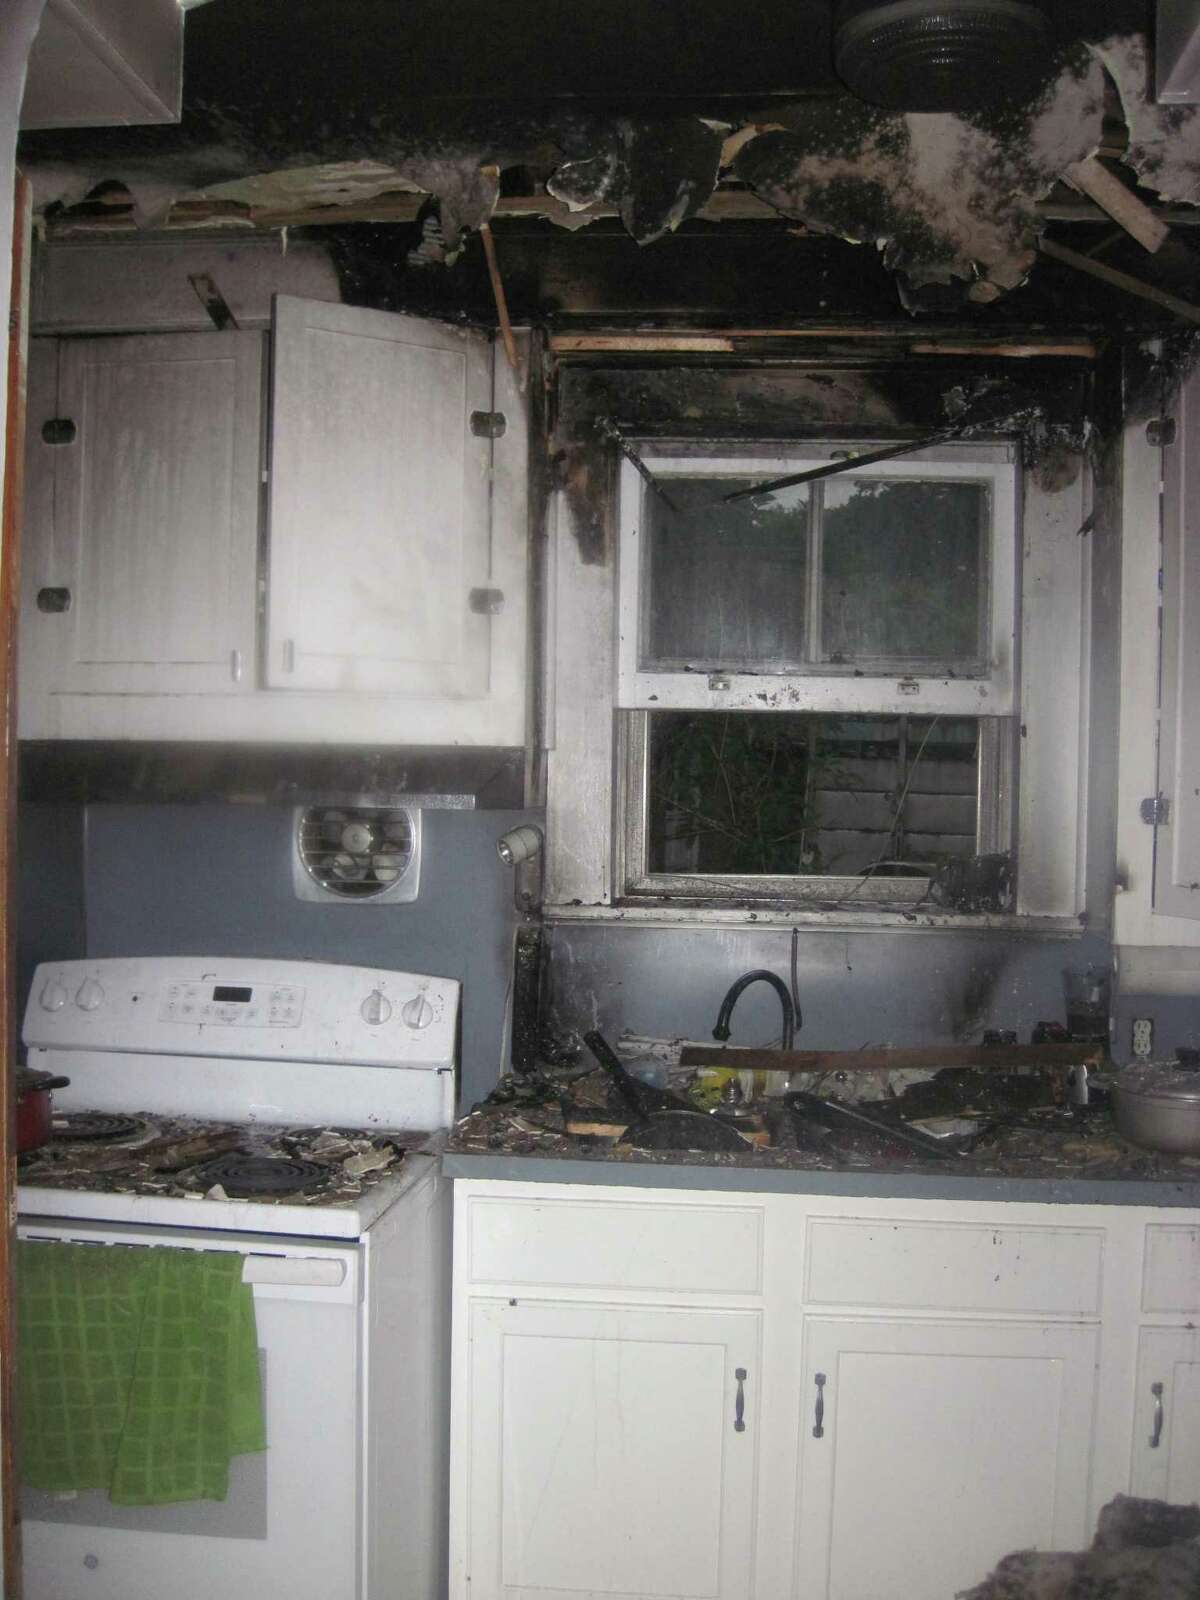 Hamden firefighters extinguished a kitchen fire Thursday, according to the department.